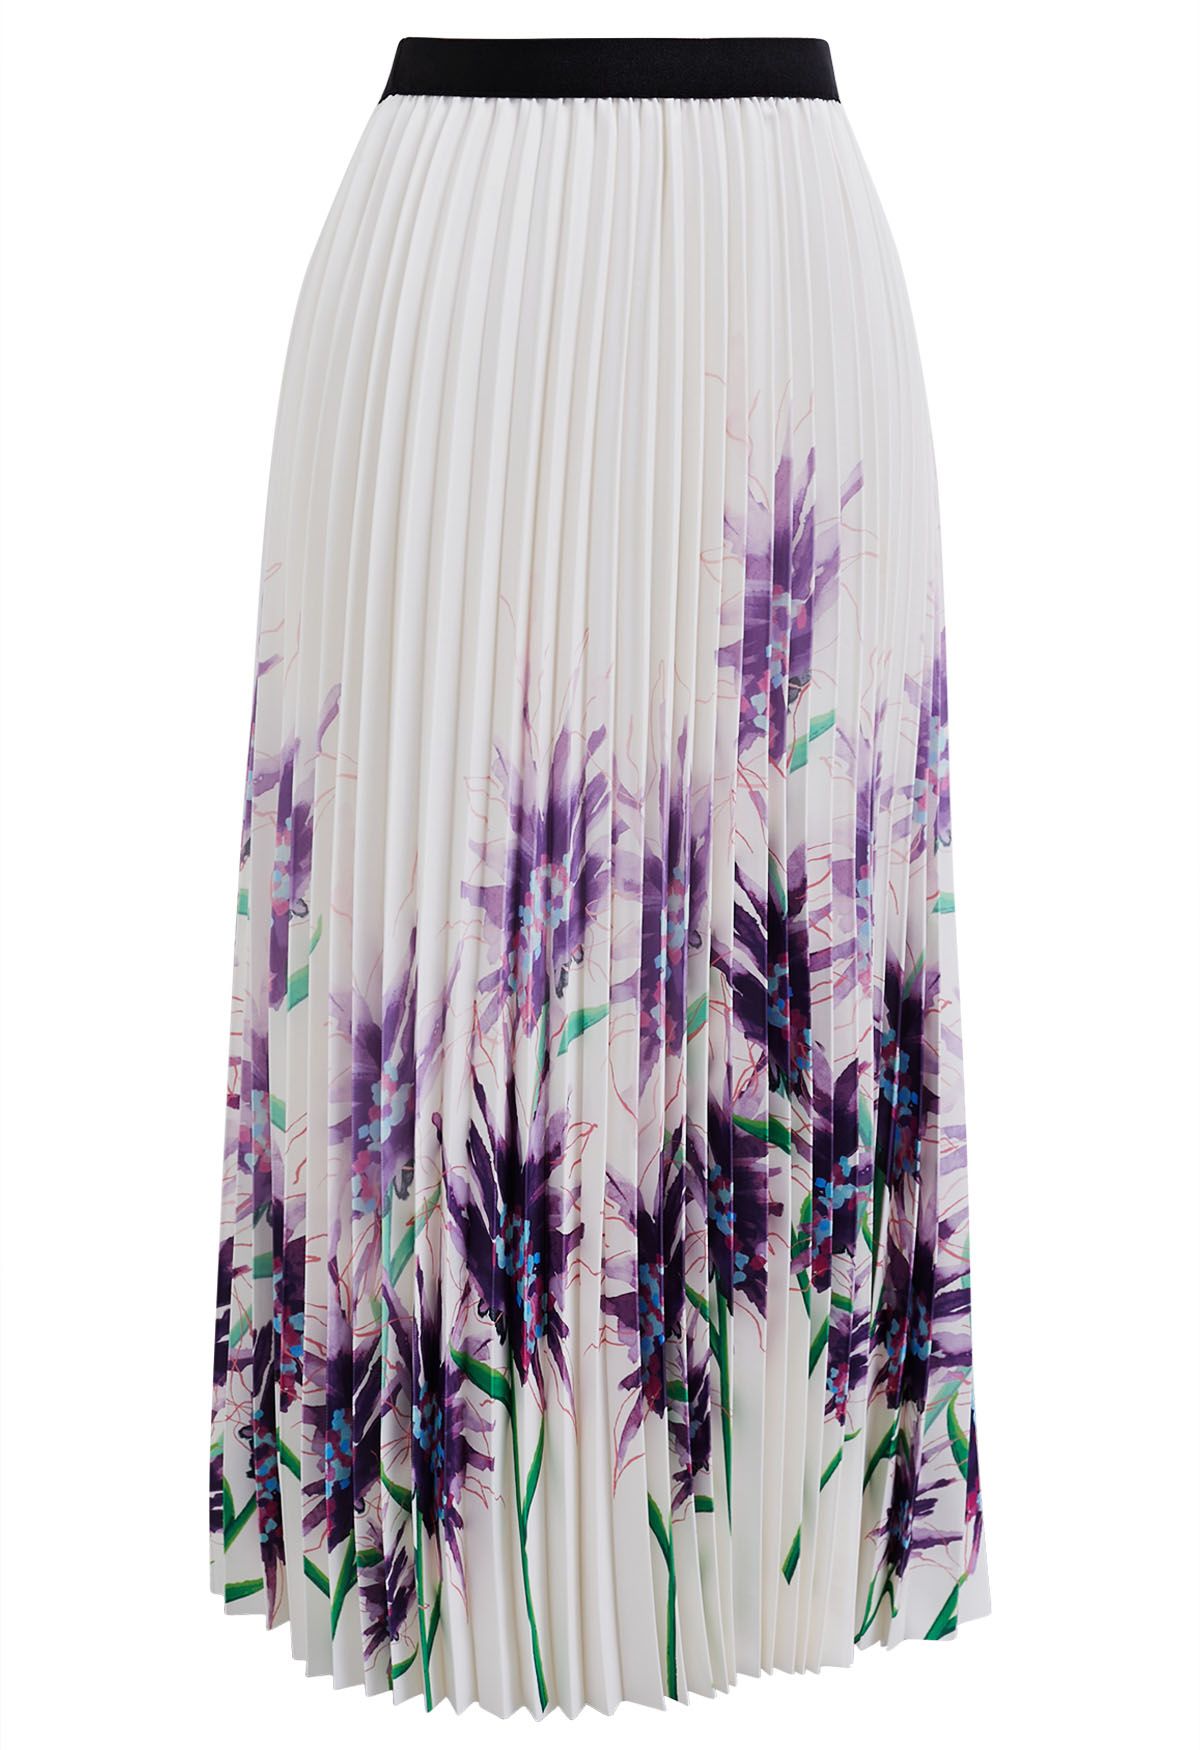 Watercolor Floral Pleated Midi Skirt in Purple